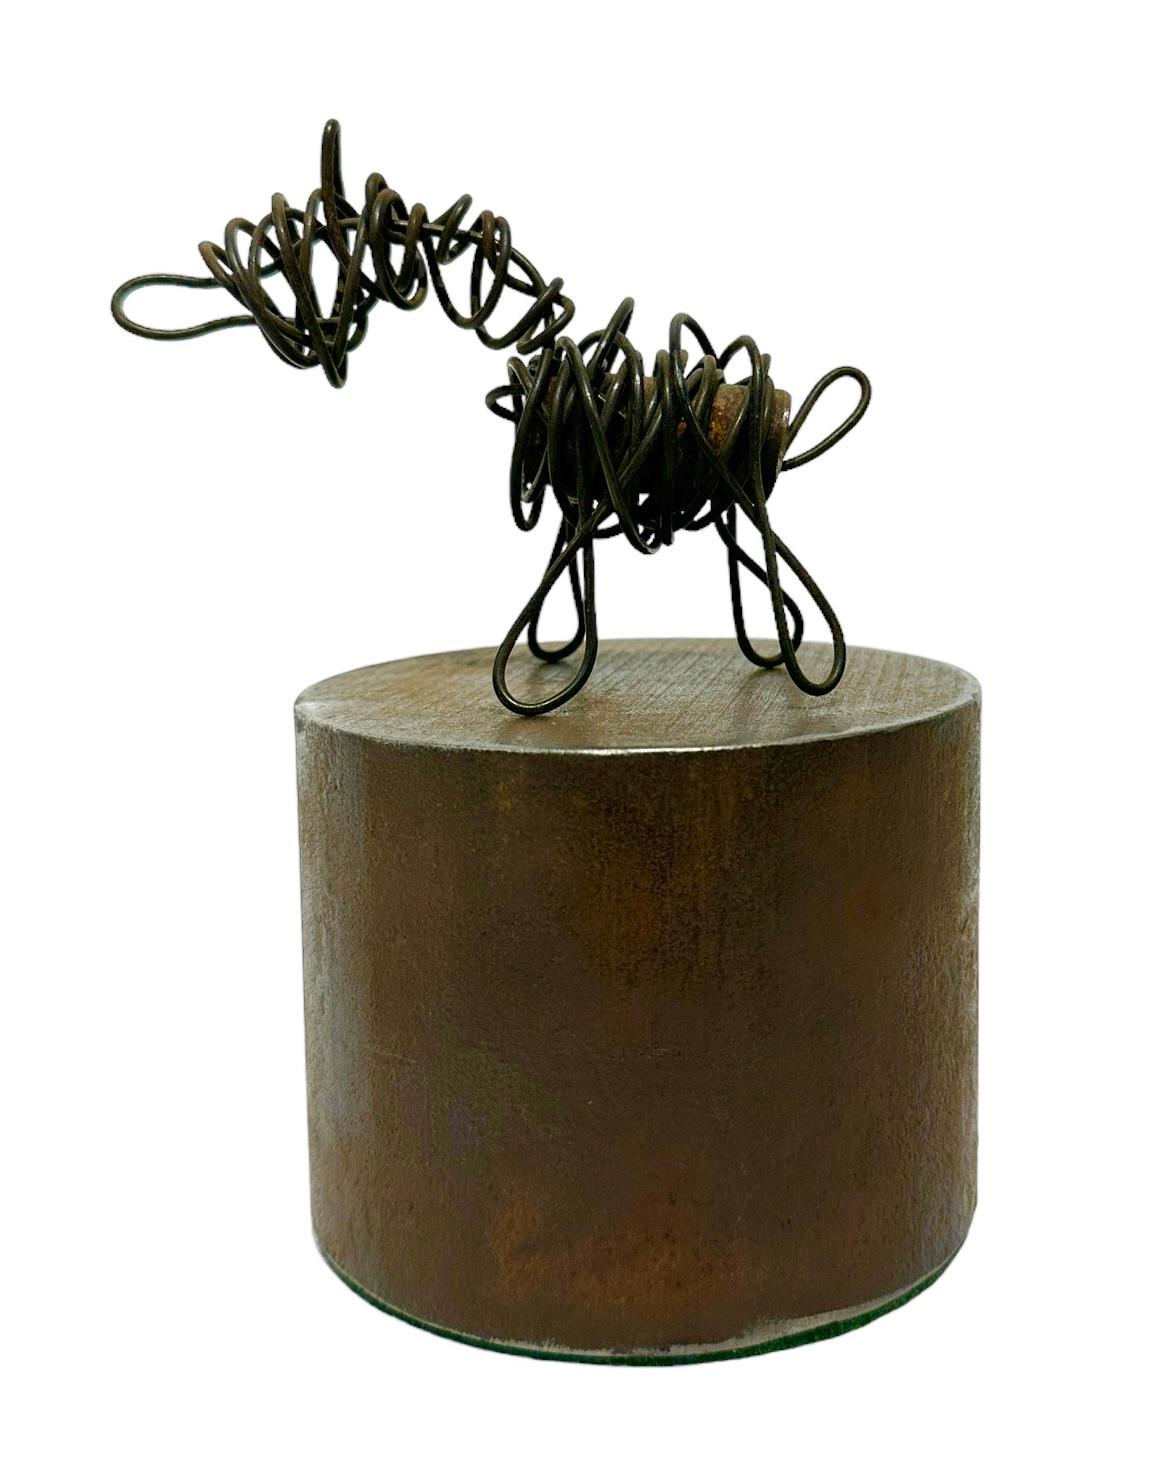 Jim Rose, known primarily for his steel furniture, was an avid collector and scoured salvage yards for unique, interesting items.  Here he has taken heavy gauge wire and formed it into a simple dog and placed it upon a salvaged steel cylinder. 